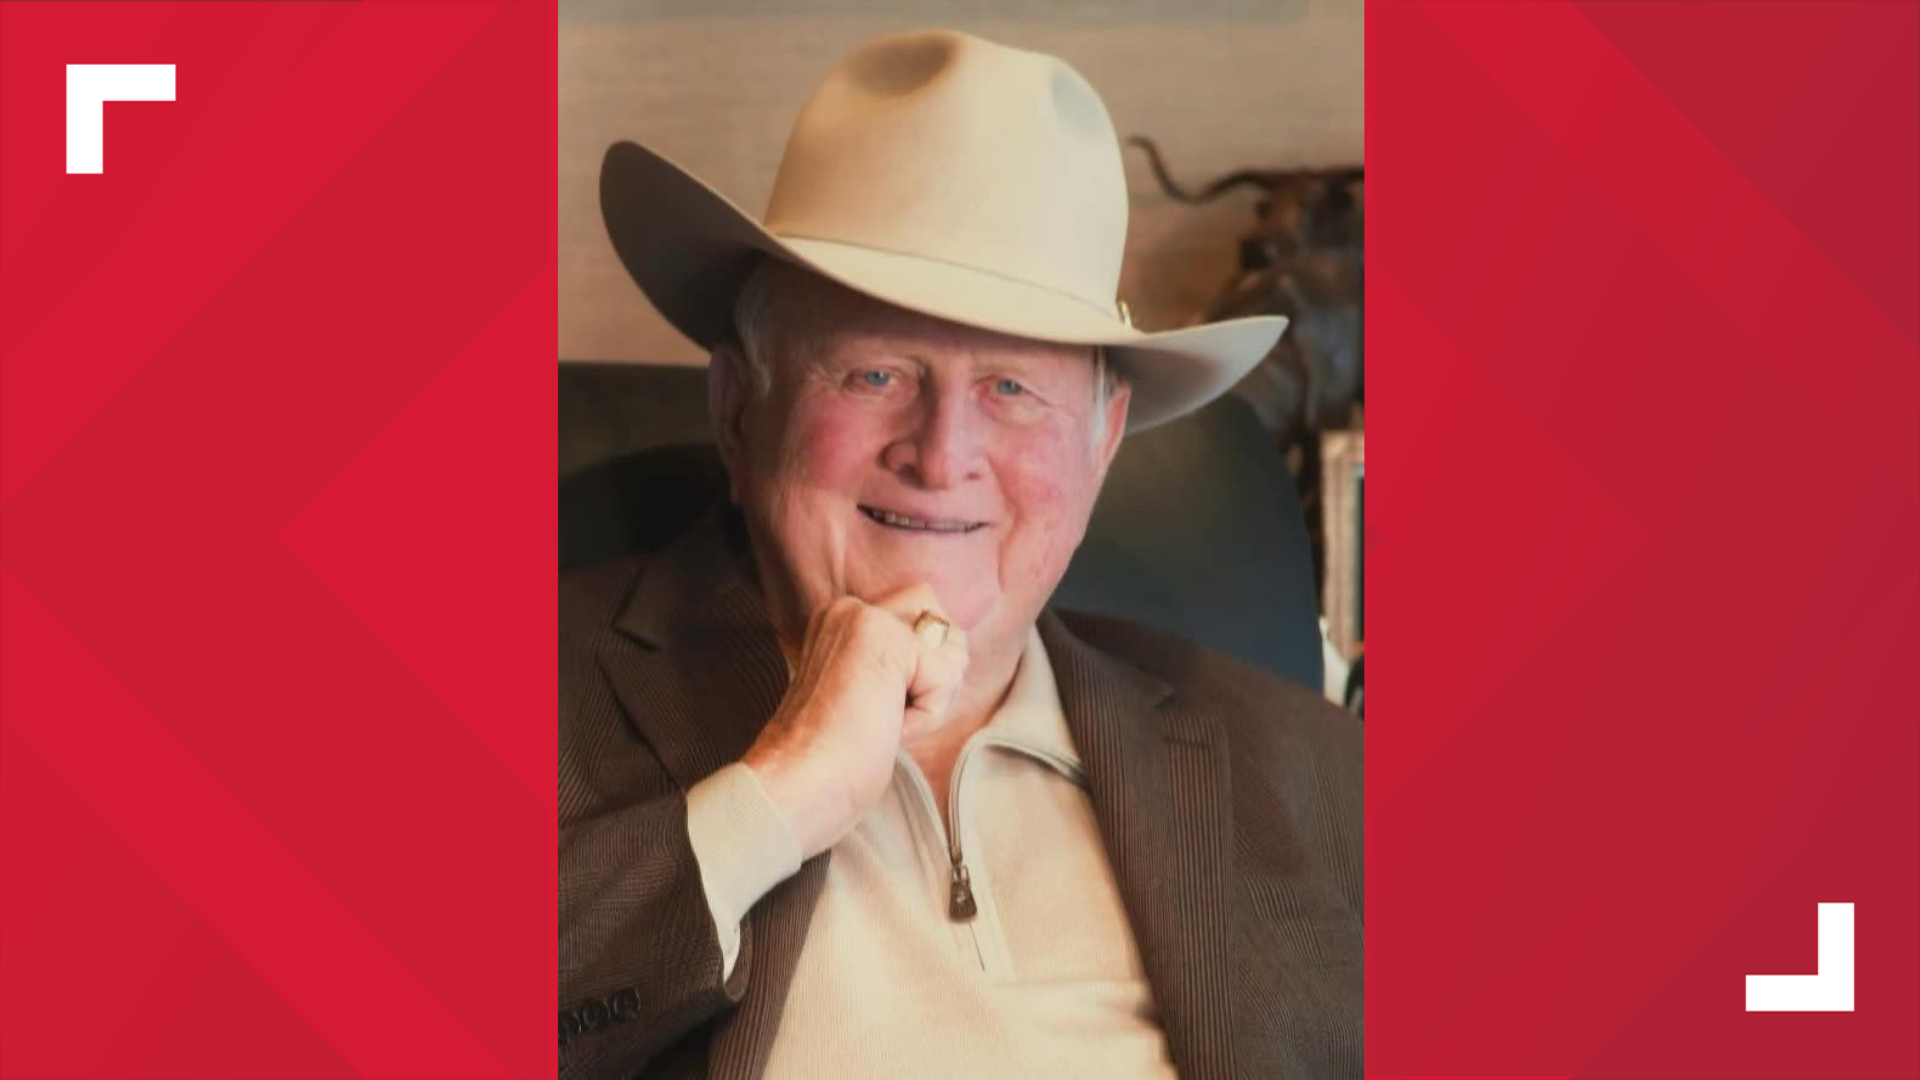 Speakers at his memorial service recognized Red McCombs' impact on San Antonio and people's lives.